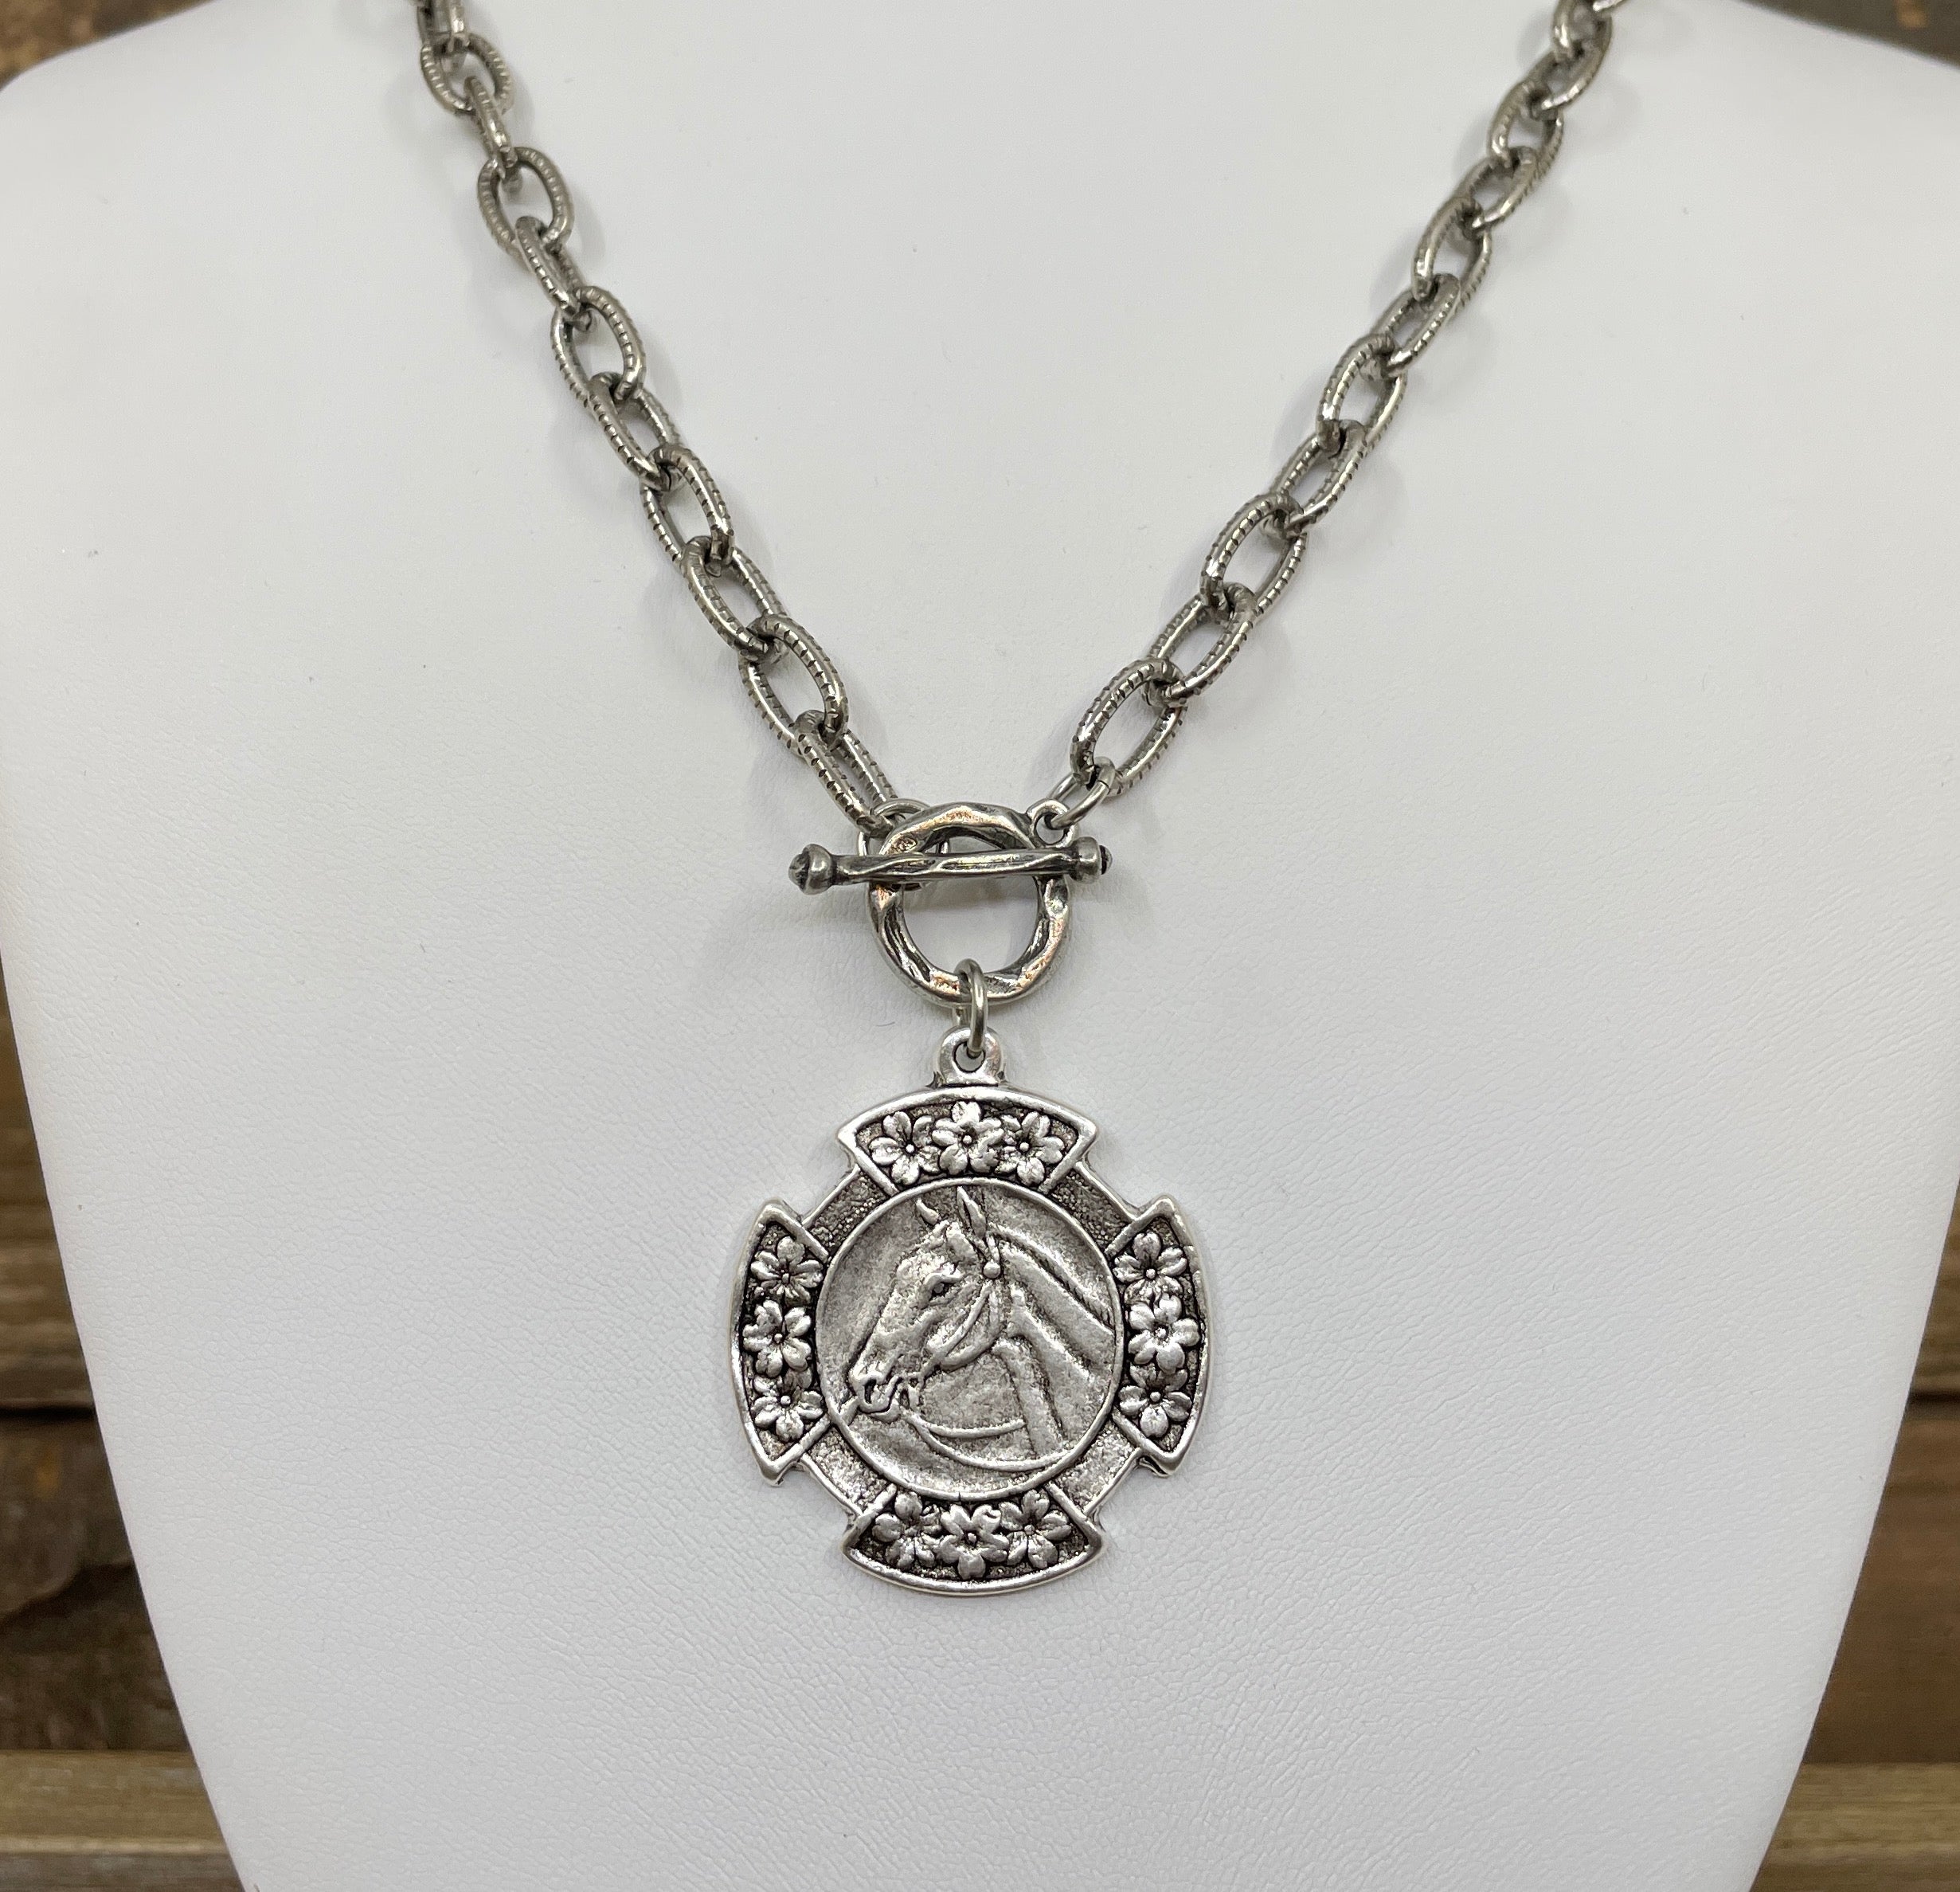 Vintage Silver 18" Chain and Toggle With Reproduction Silver Horse Flower Pendant